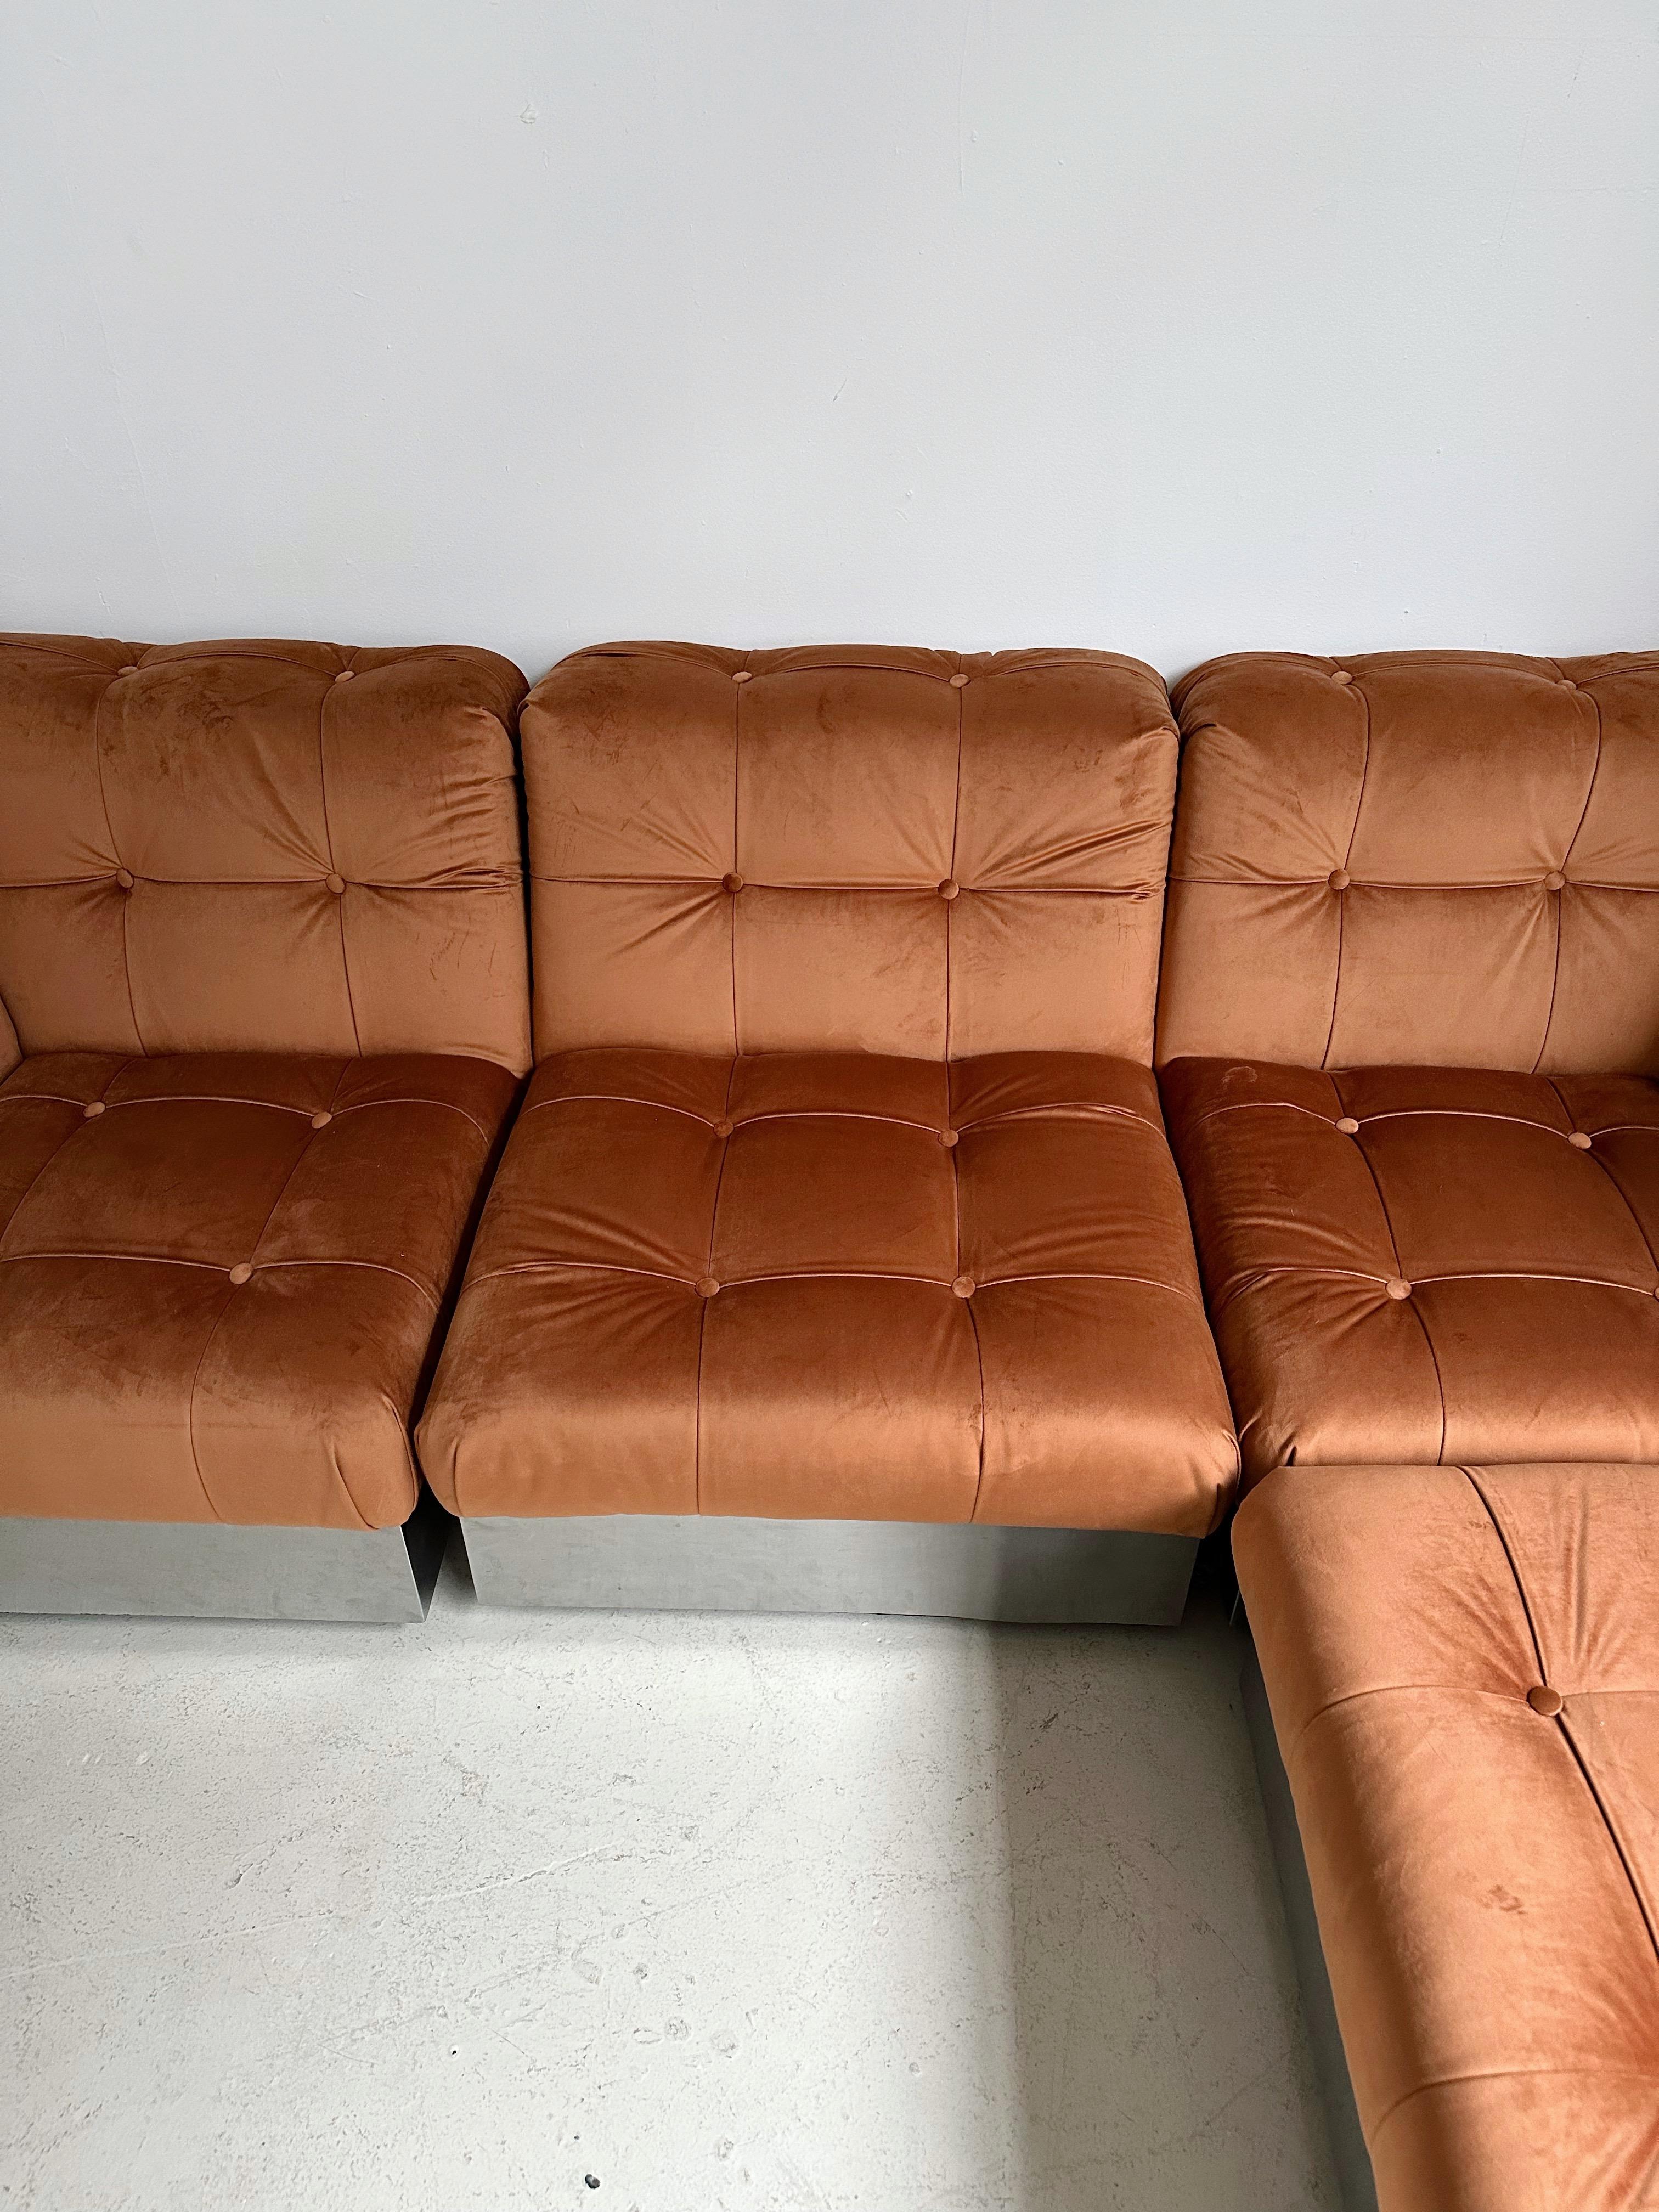 Samt & Stahlgestell 4 Pieces Modulares Sofa att. to Canasta by Giorgio Montani im Zustand „Gut“ in Outremont, QC